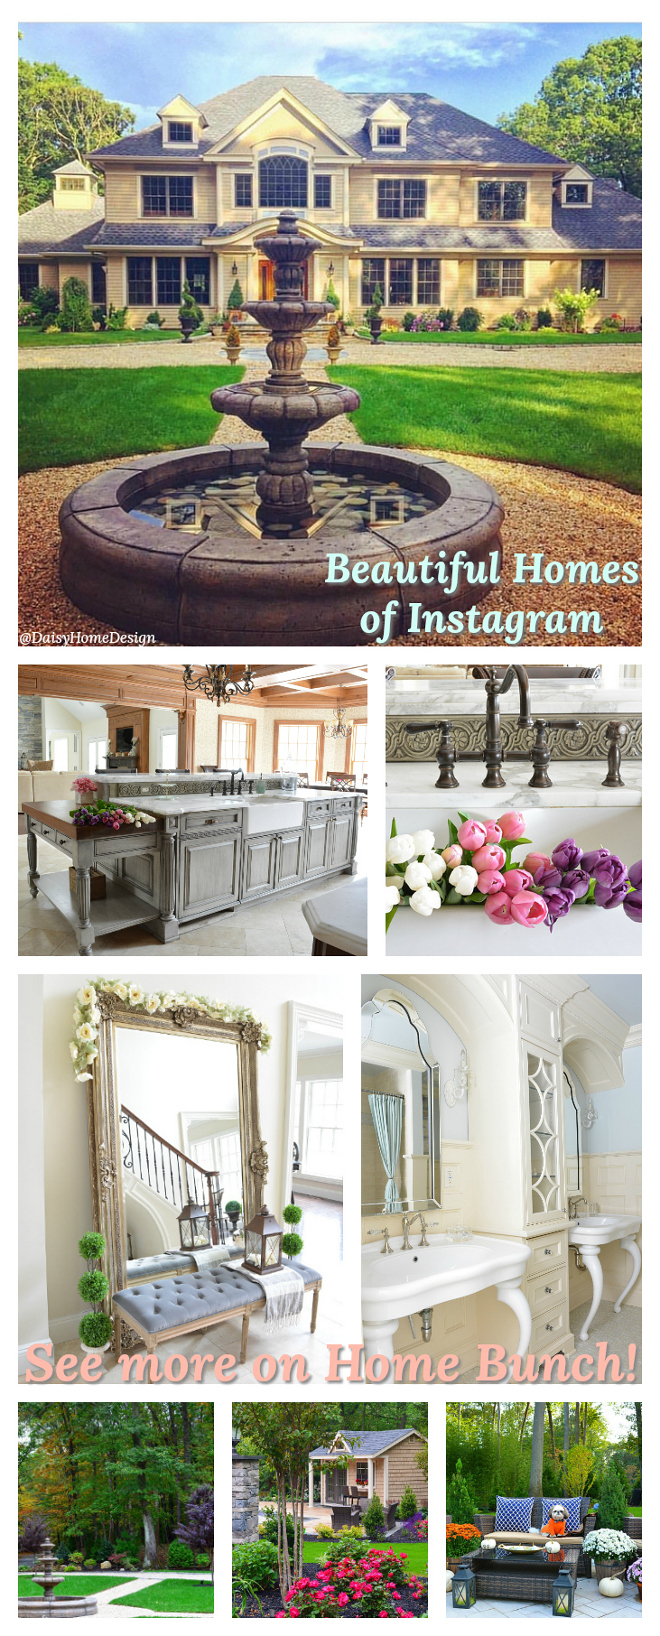 Beautiful Homes of Instagram @DaisyHomeDesign